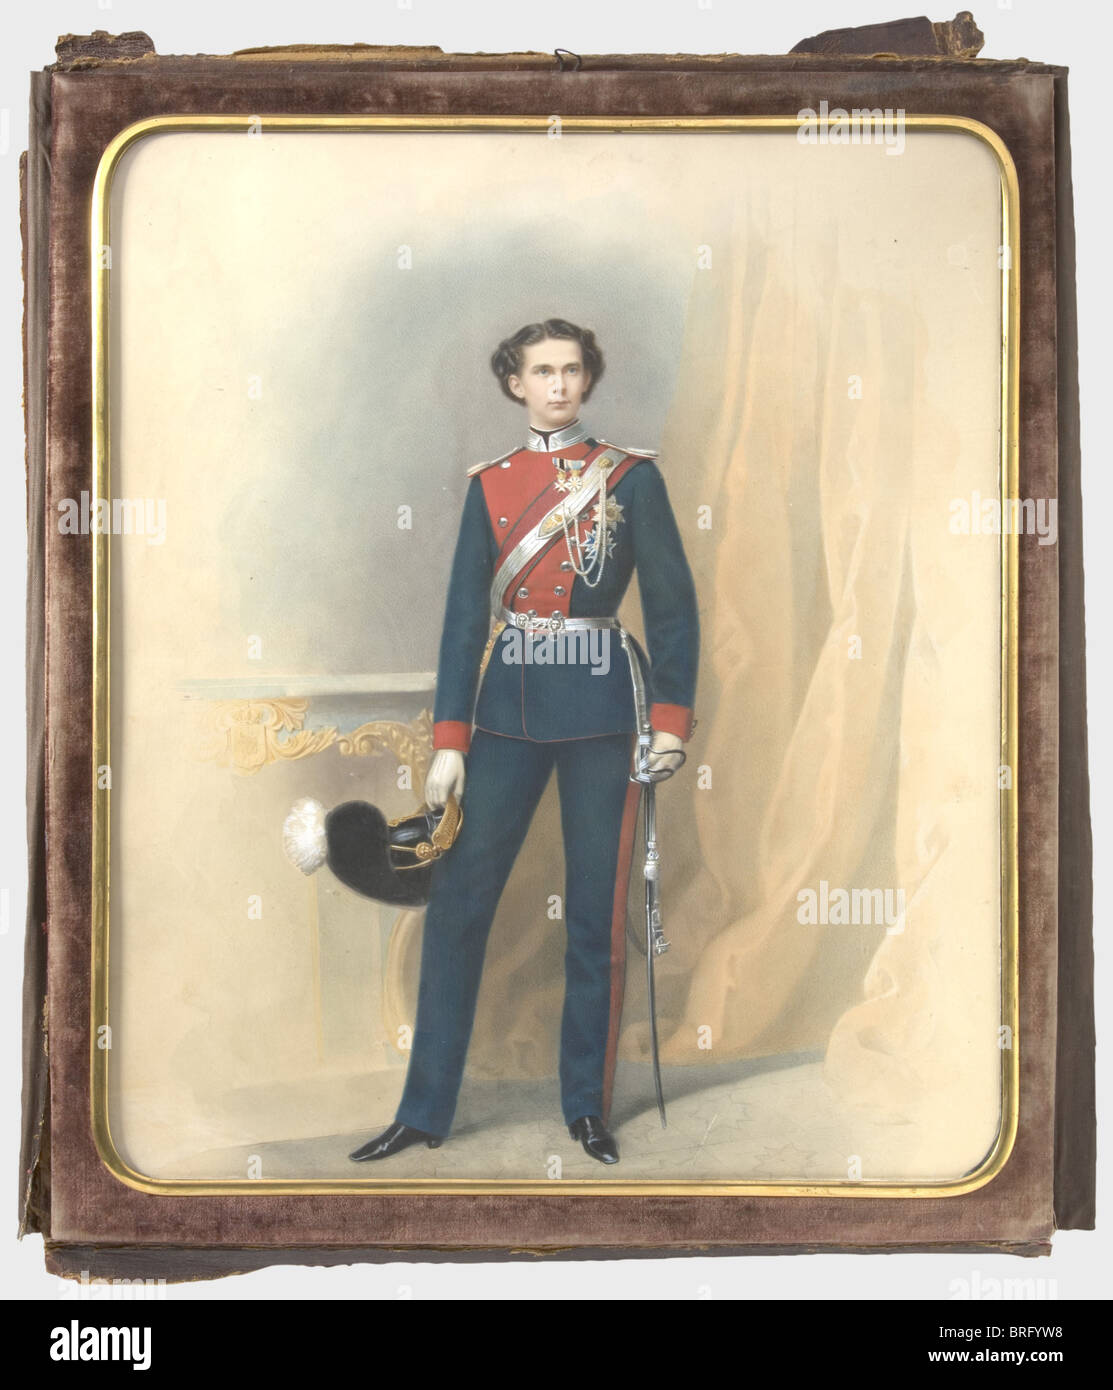 King Ludwig II of Bavaria (1845 - 1886), a portrait of the young king in Chevauleger uniform Gouache on paper. Very elaborate portrait of the king (ca. 1864/65) in the uniform of the 4th Royal Bavarian Chevauleger Regiment 'König' decorated with medals. In the background a console table with the Bavarian coat of arms and a draped curtain. Unsigned. Framed and in embossed leather travel case with inventory label (transl.) 'Property H.I.H. Empress Elisabeth'. 48 x 41.5 cm. The 4th Chevauleger Regiment 'König', based in Augsburg, was considered the most prestigiou, Stock Photo